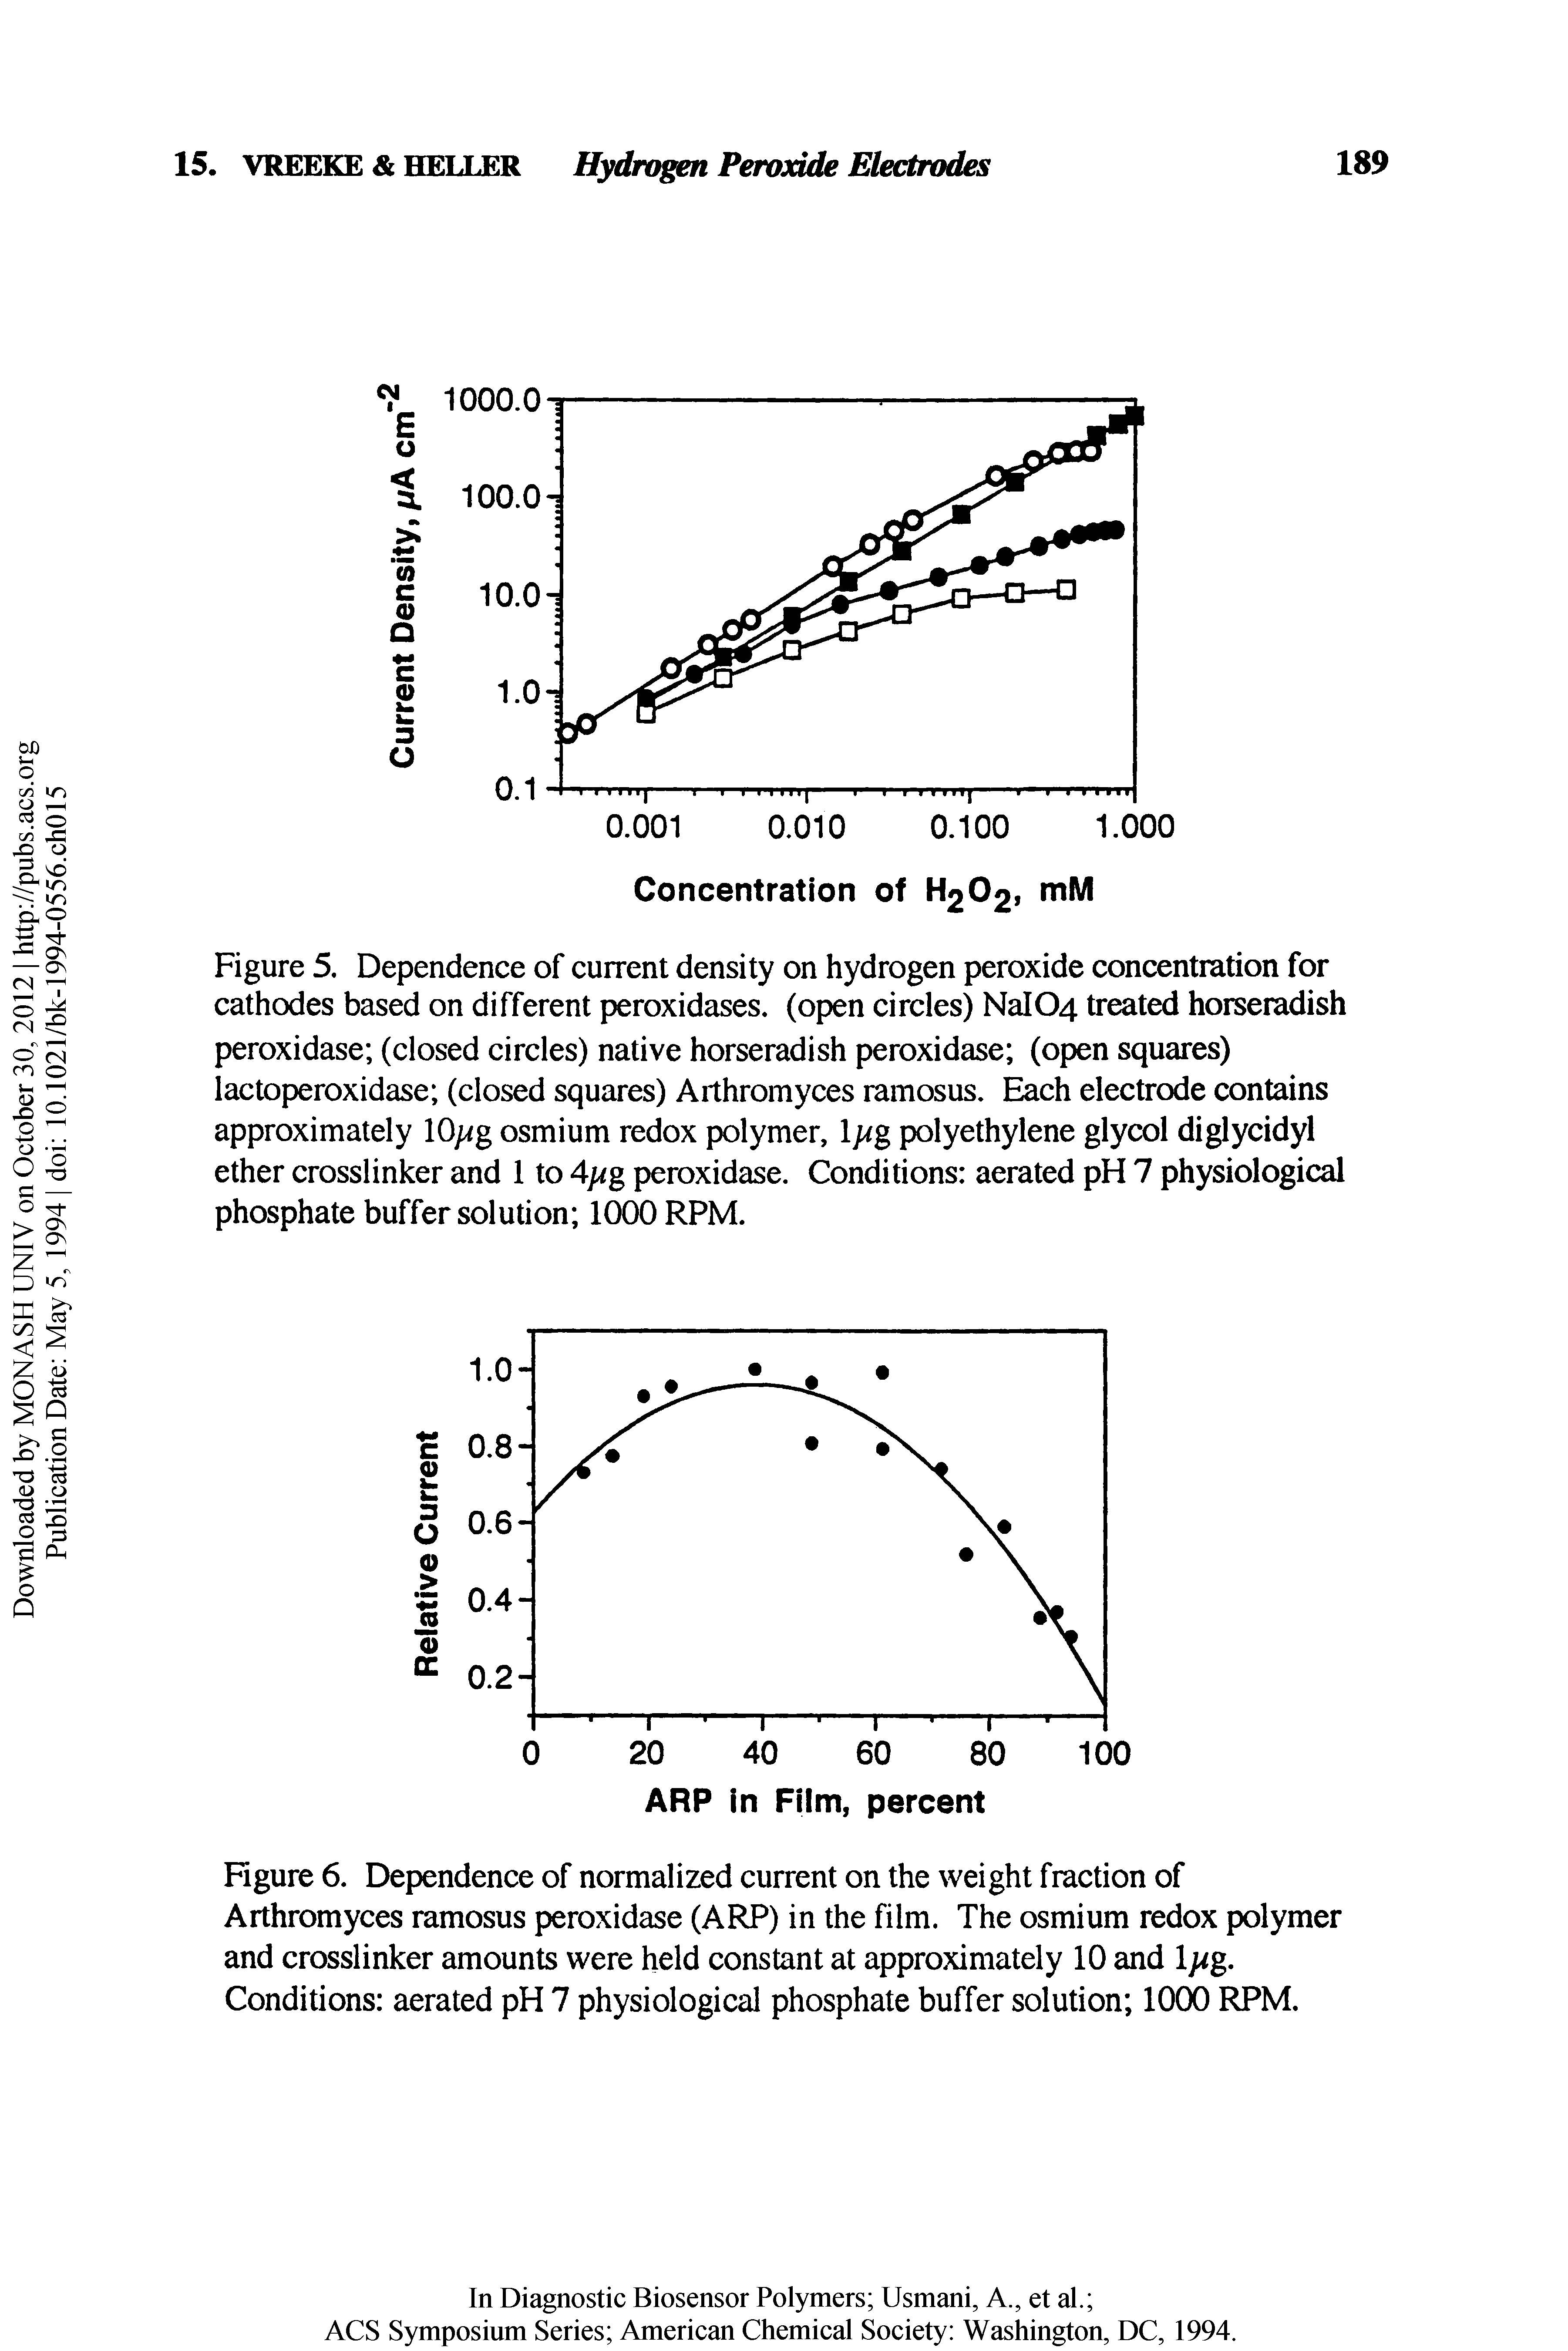 Figure 5. Dependence of current density on hydrogen peroxide concentration for cathodes based on different peroxidases, (open circles) NaI04 treated horseradish peroxidase (closed circles) native horseradish peroxidase (open squares) lactoperoxidase (closed squares) Aithromyces ramosus. Each electrode contains approximately 10/ g osmium redox polymer, polyethylene glycol diglycidyl ether crosslinker and 1 to 4/<g peroxidase. Conditions aerated pH 7 physiological phosphate buffer solution 1000 RPM.